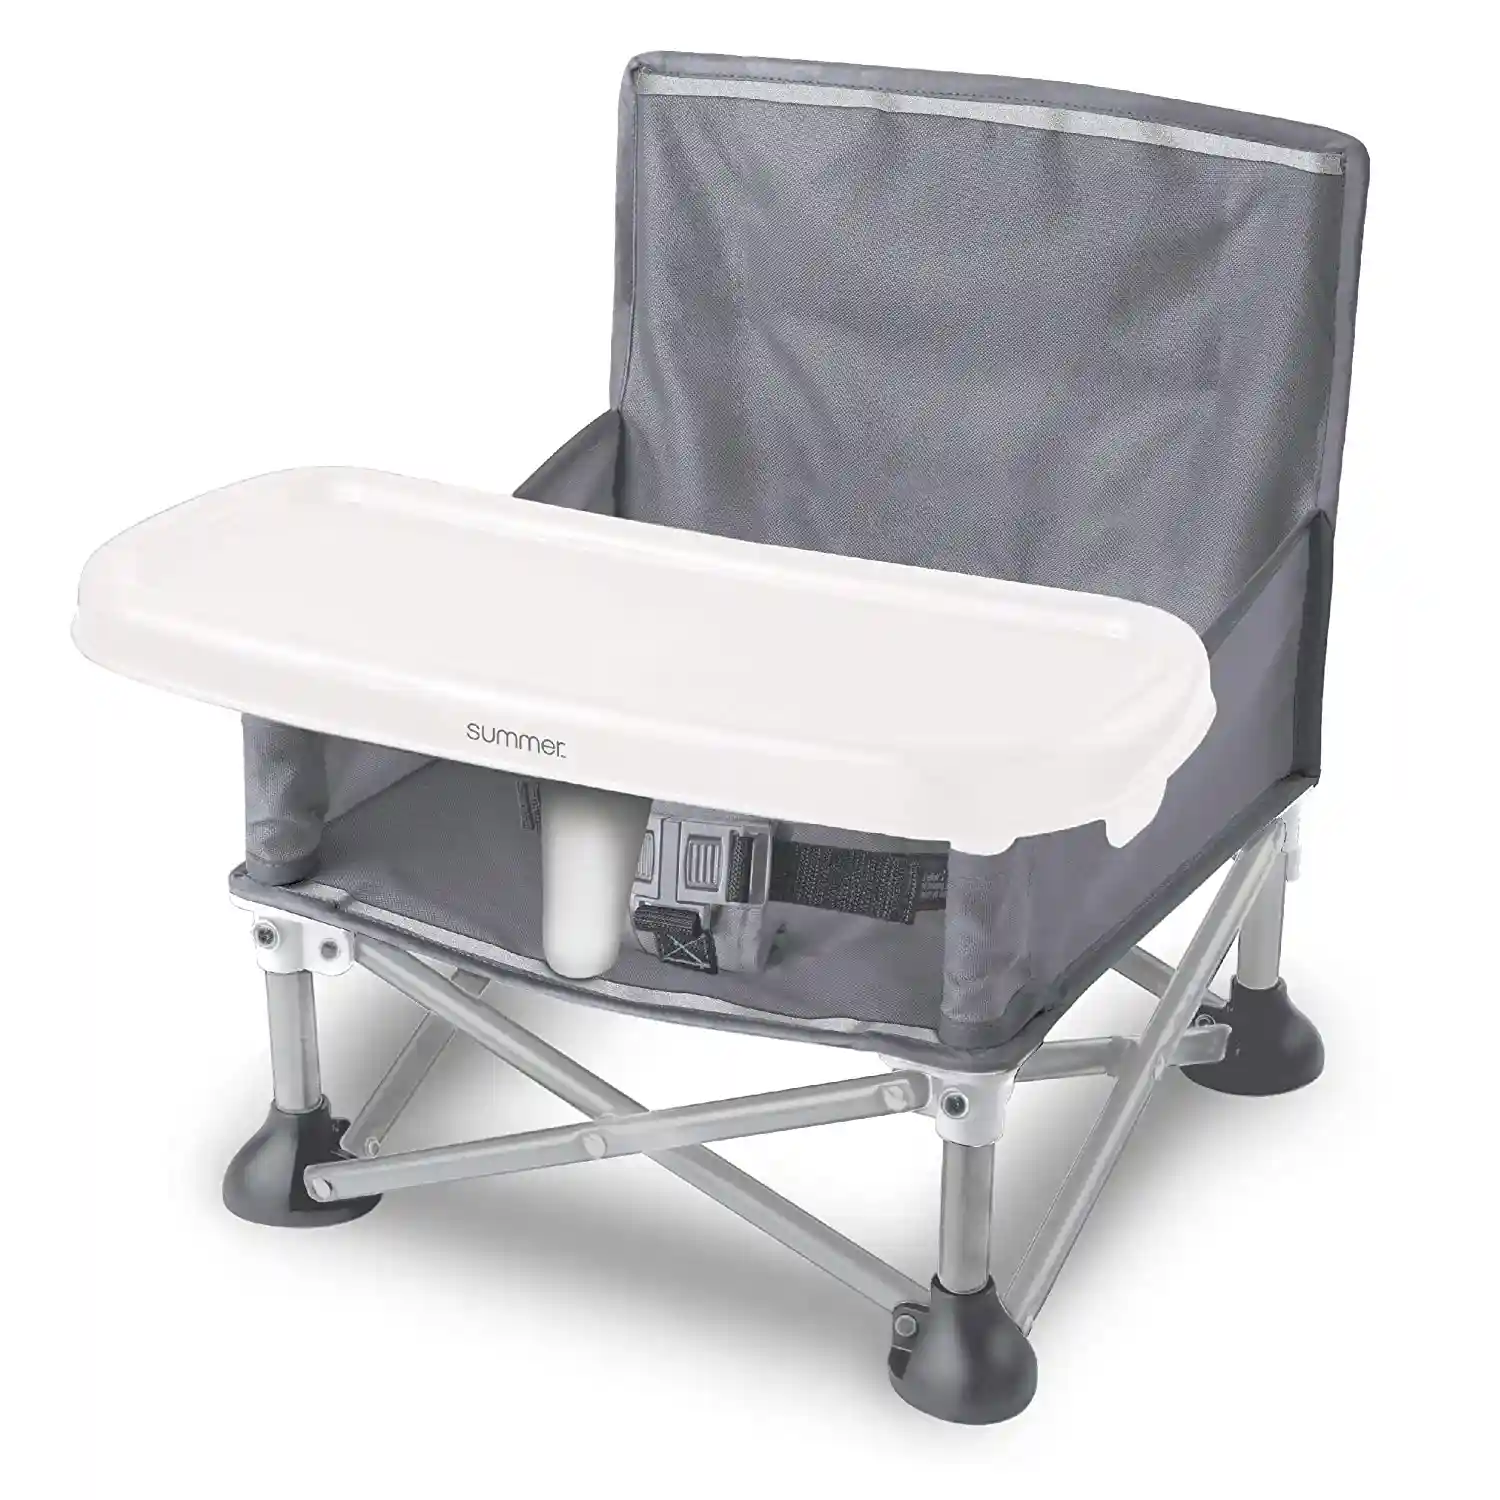 Summer Pop ‘N Sit Portable Booster Chair, Gray